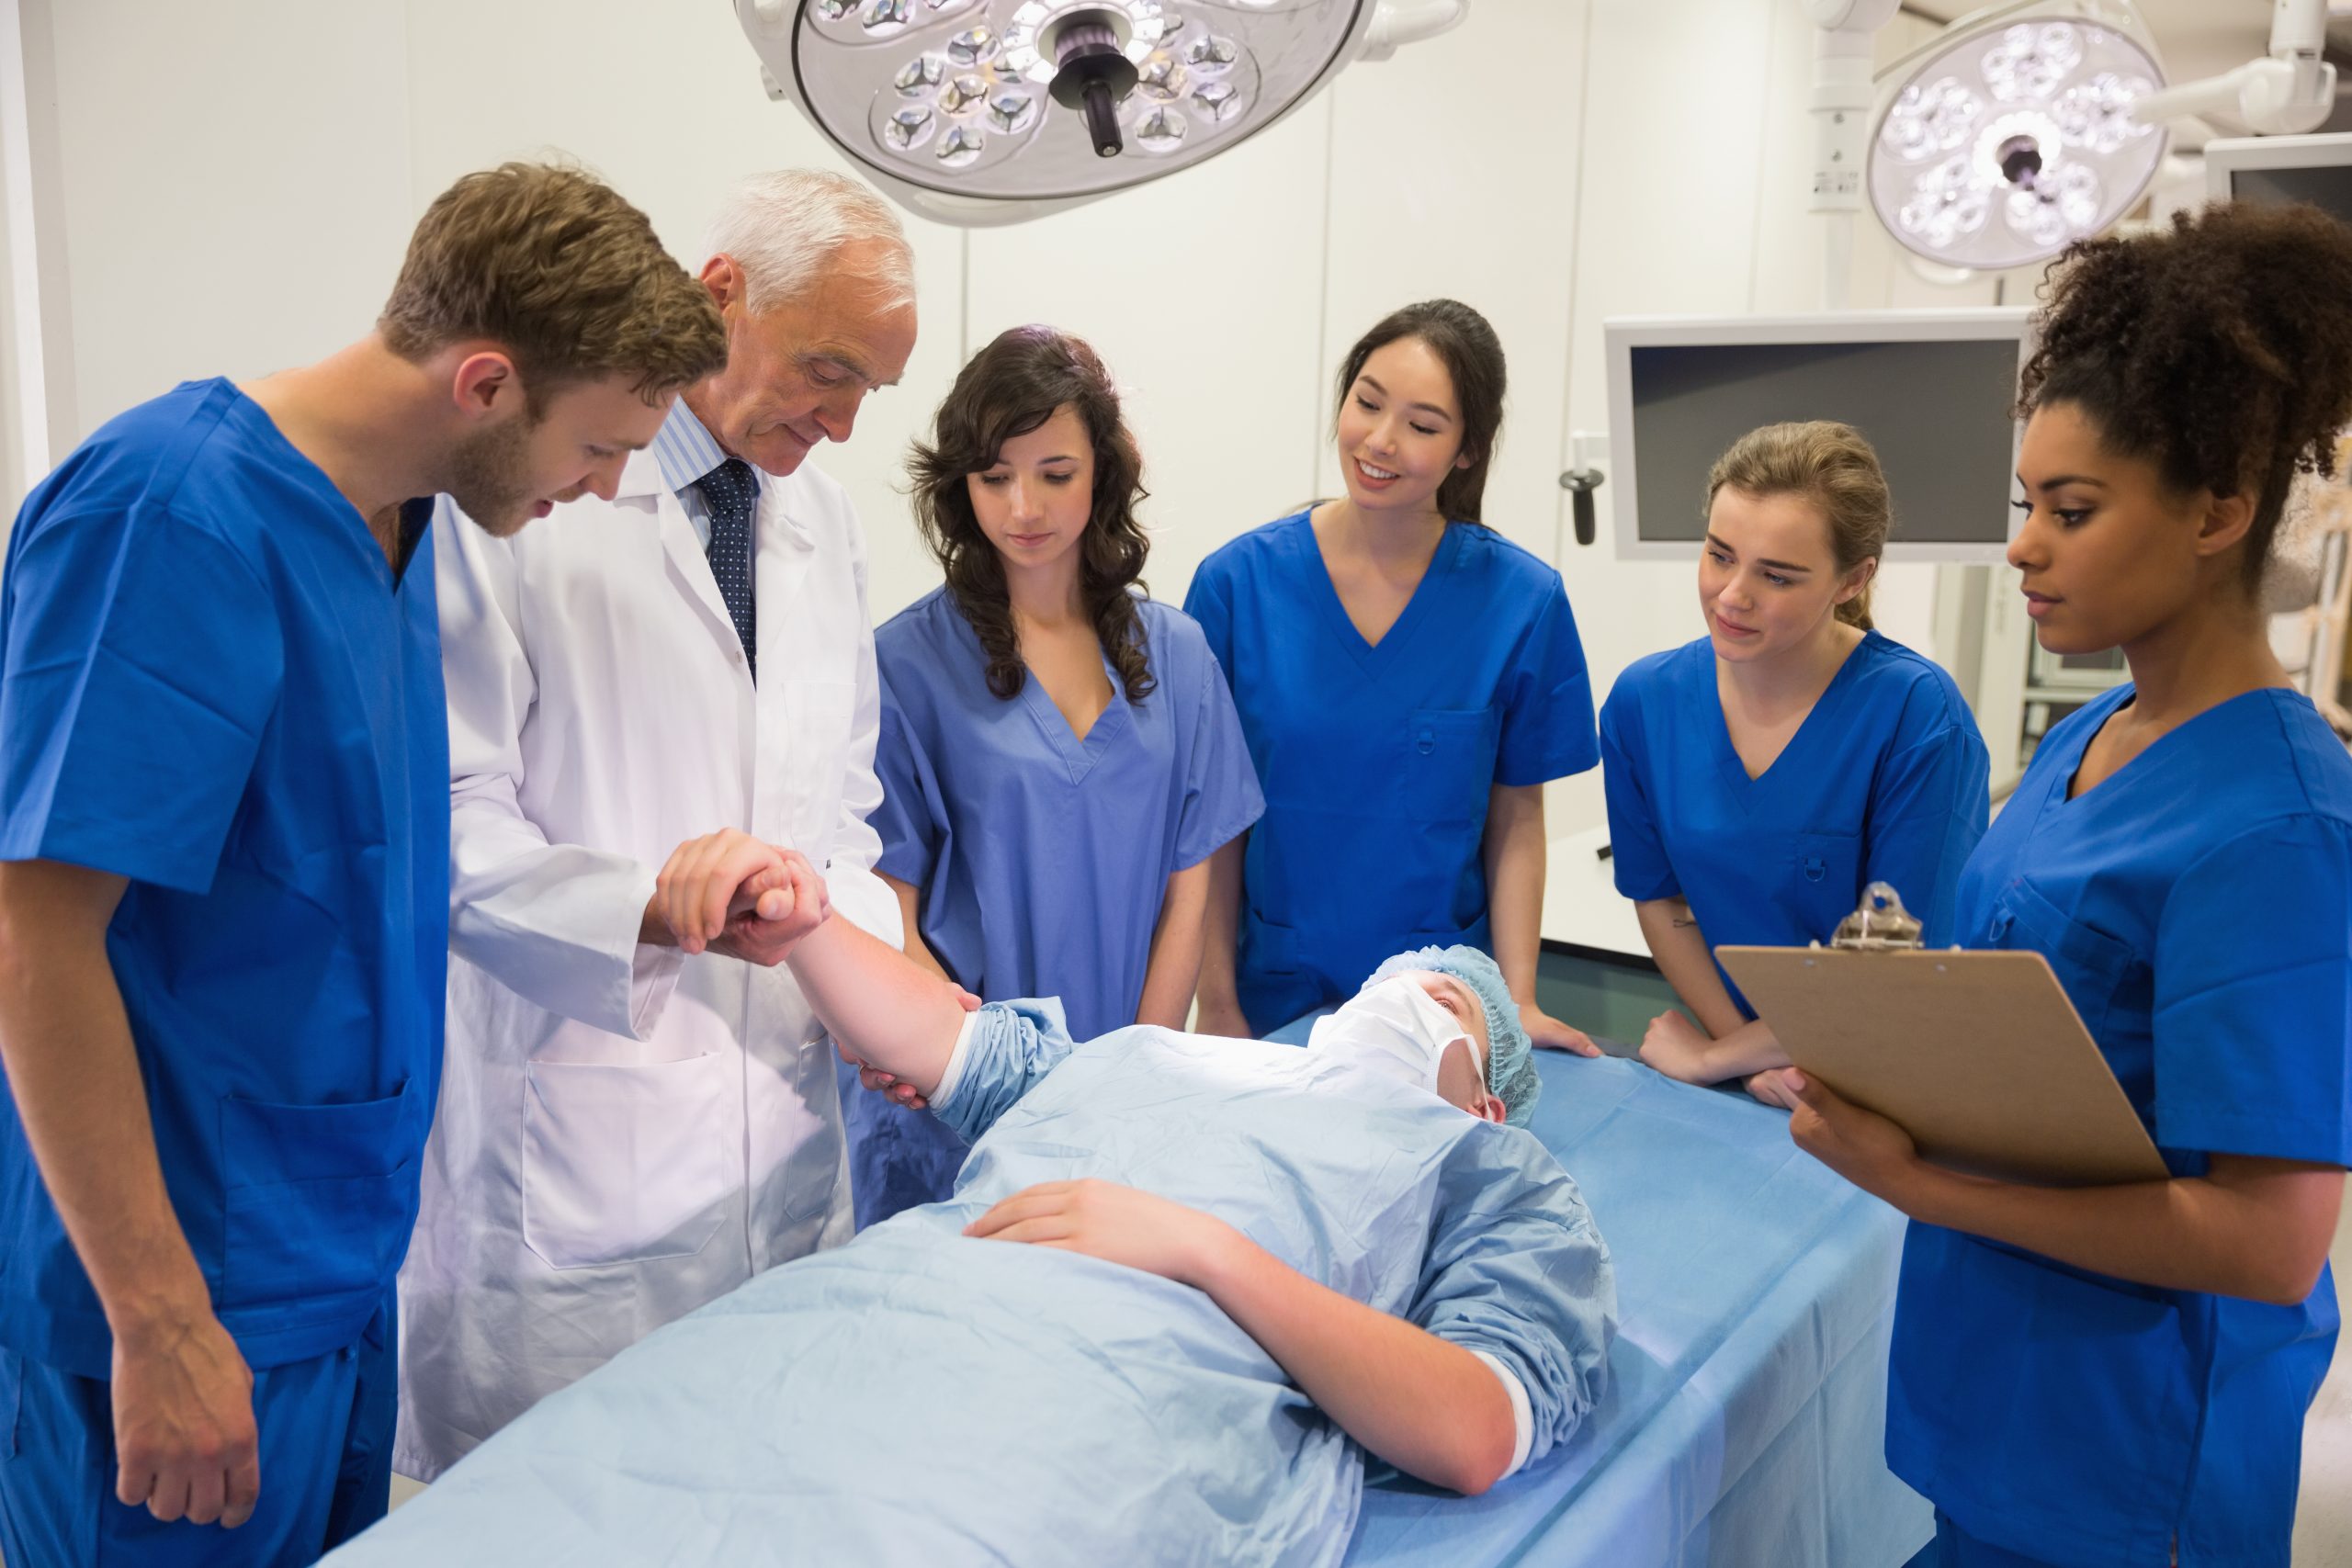 Operating theatre staff gather around a patient